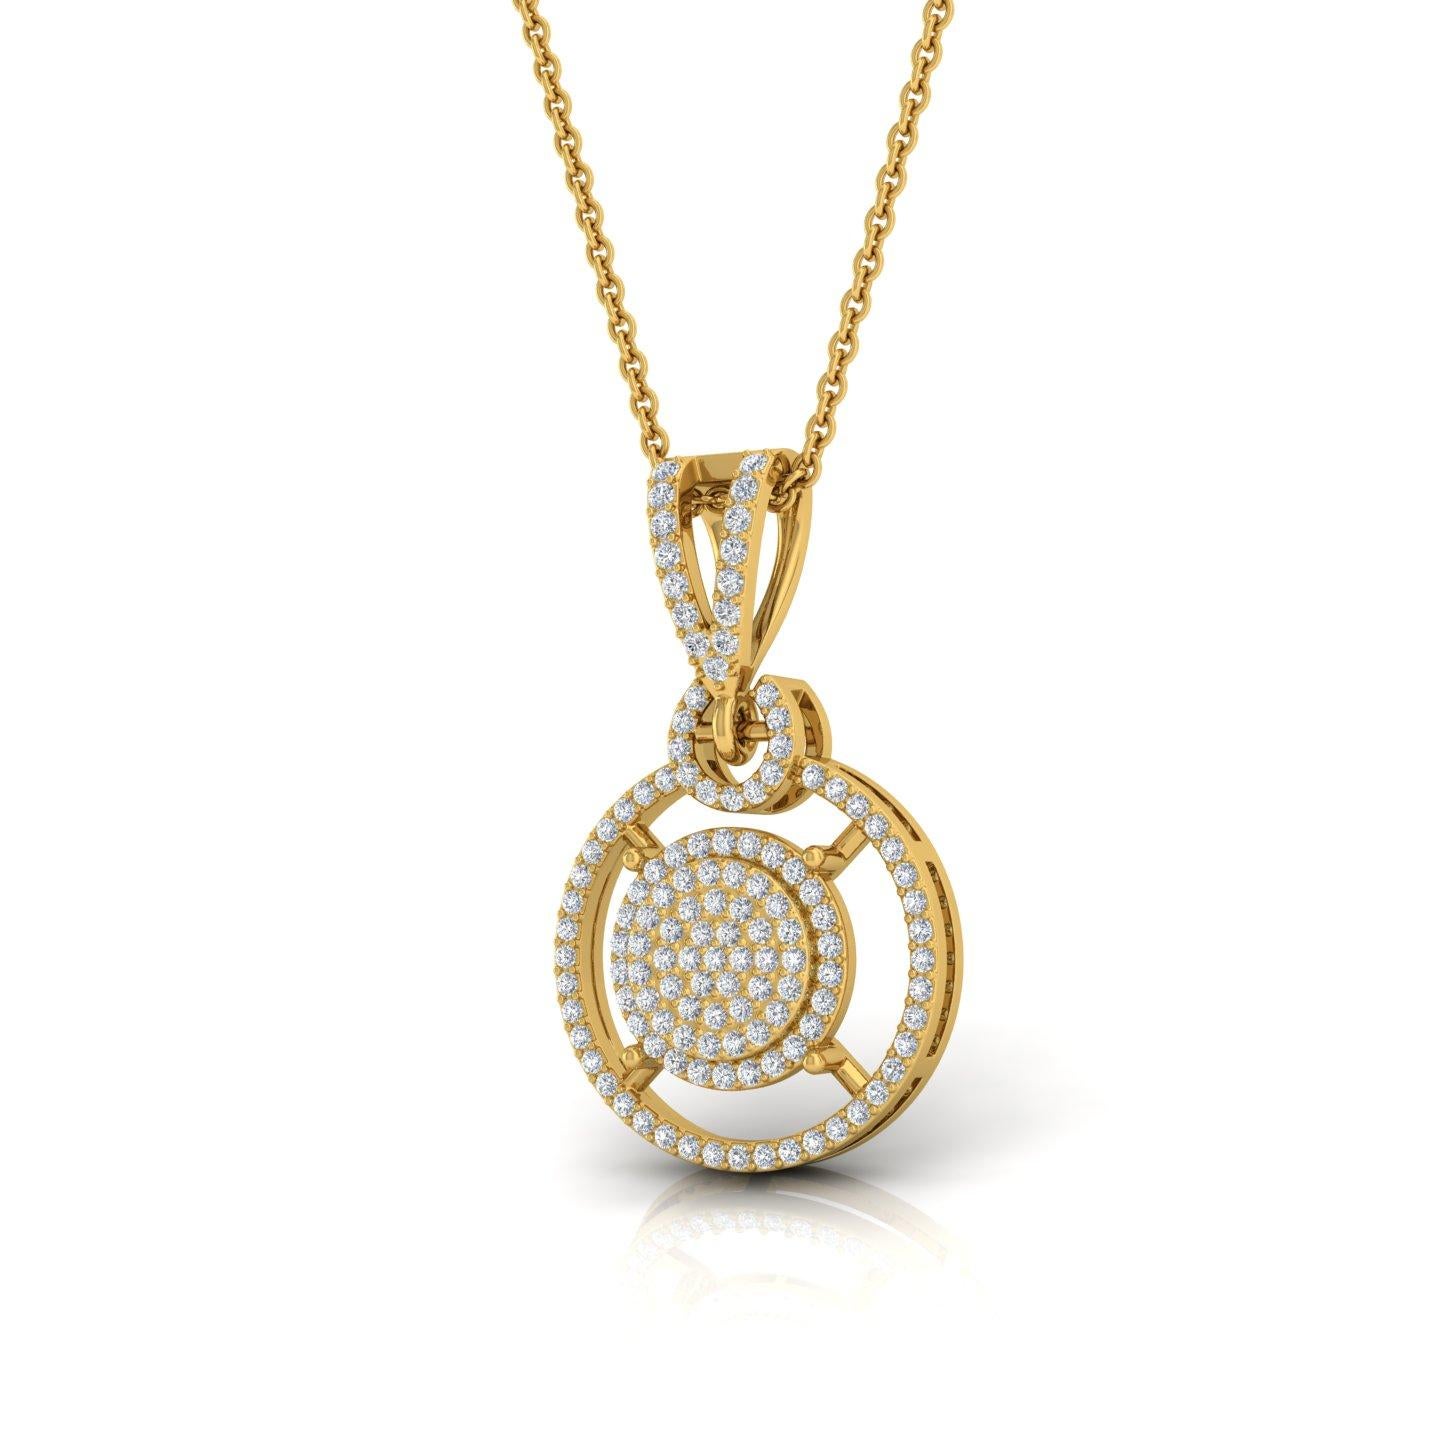 This Diamond Pave Charm Pendant Necklace is a versatile piece that can be worn for various occasions. Its timeless design and exquisite craftsmanship make it suitable for both formal events and everyday wear. It adds a touch of glamour and sparkle